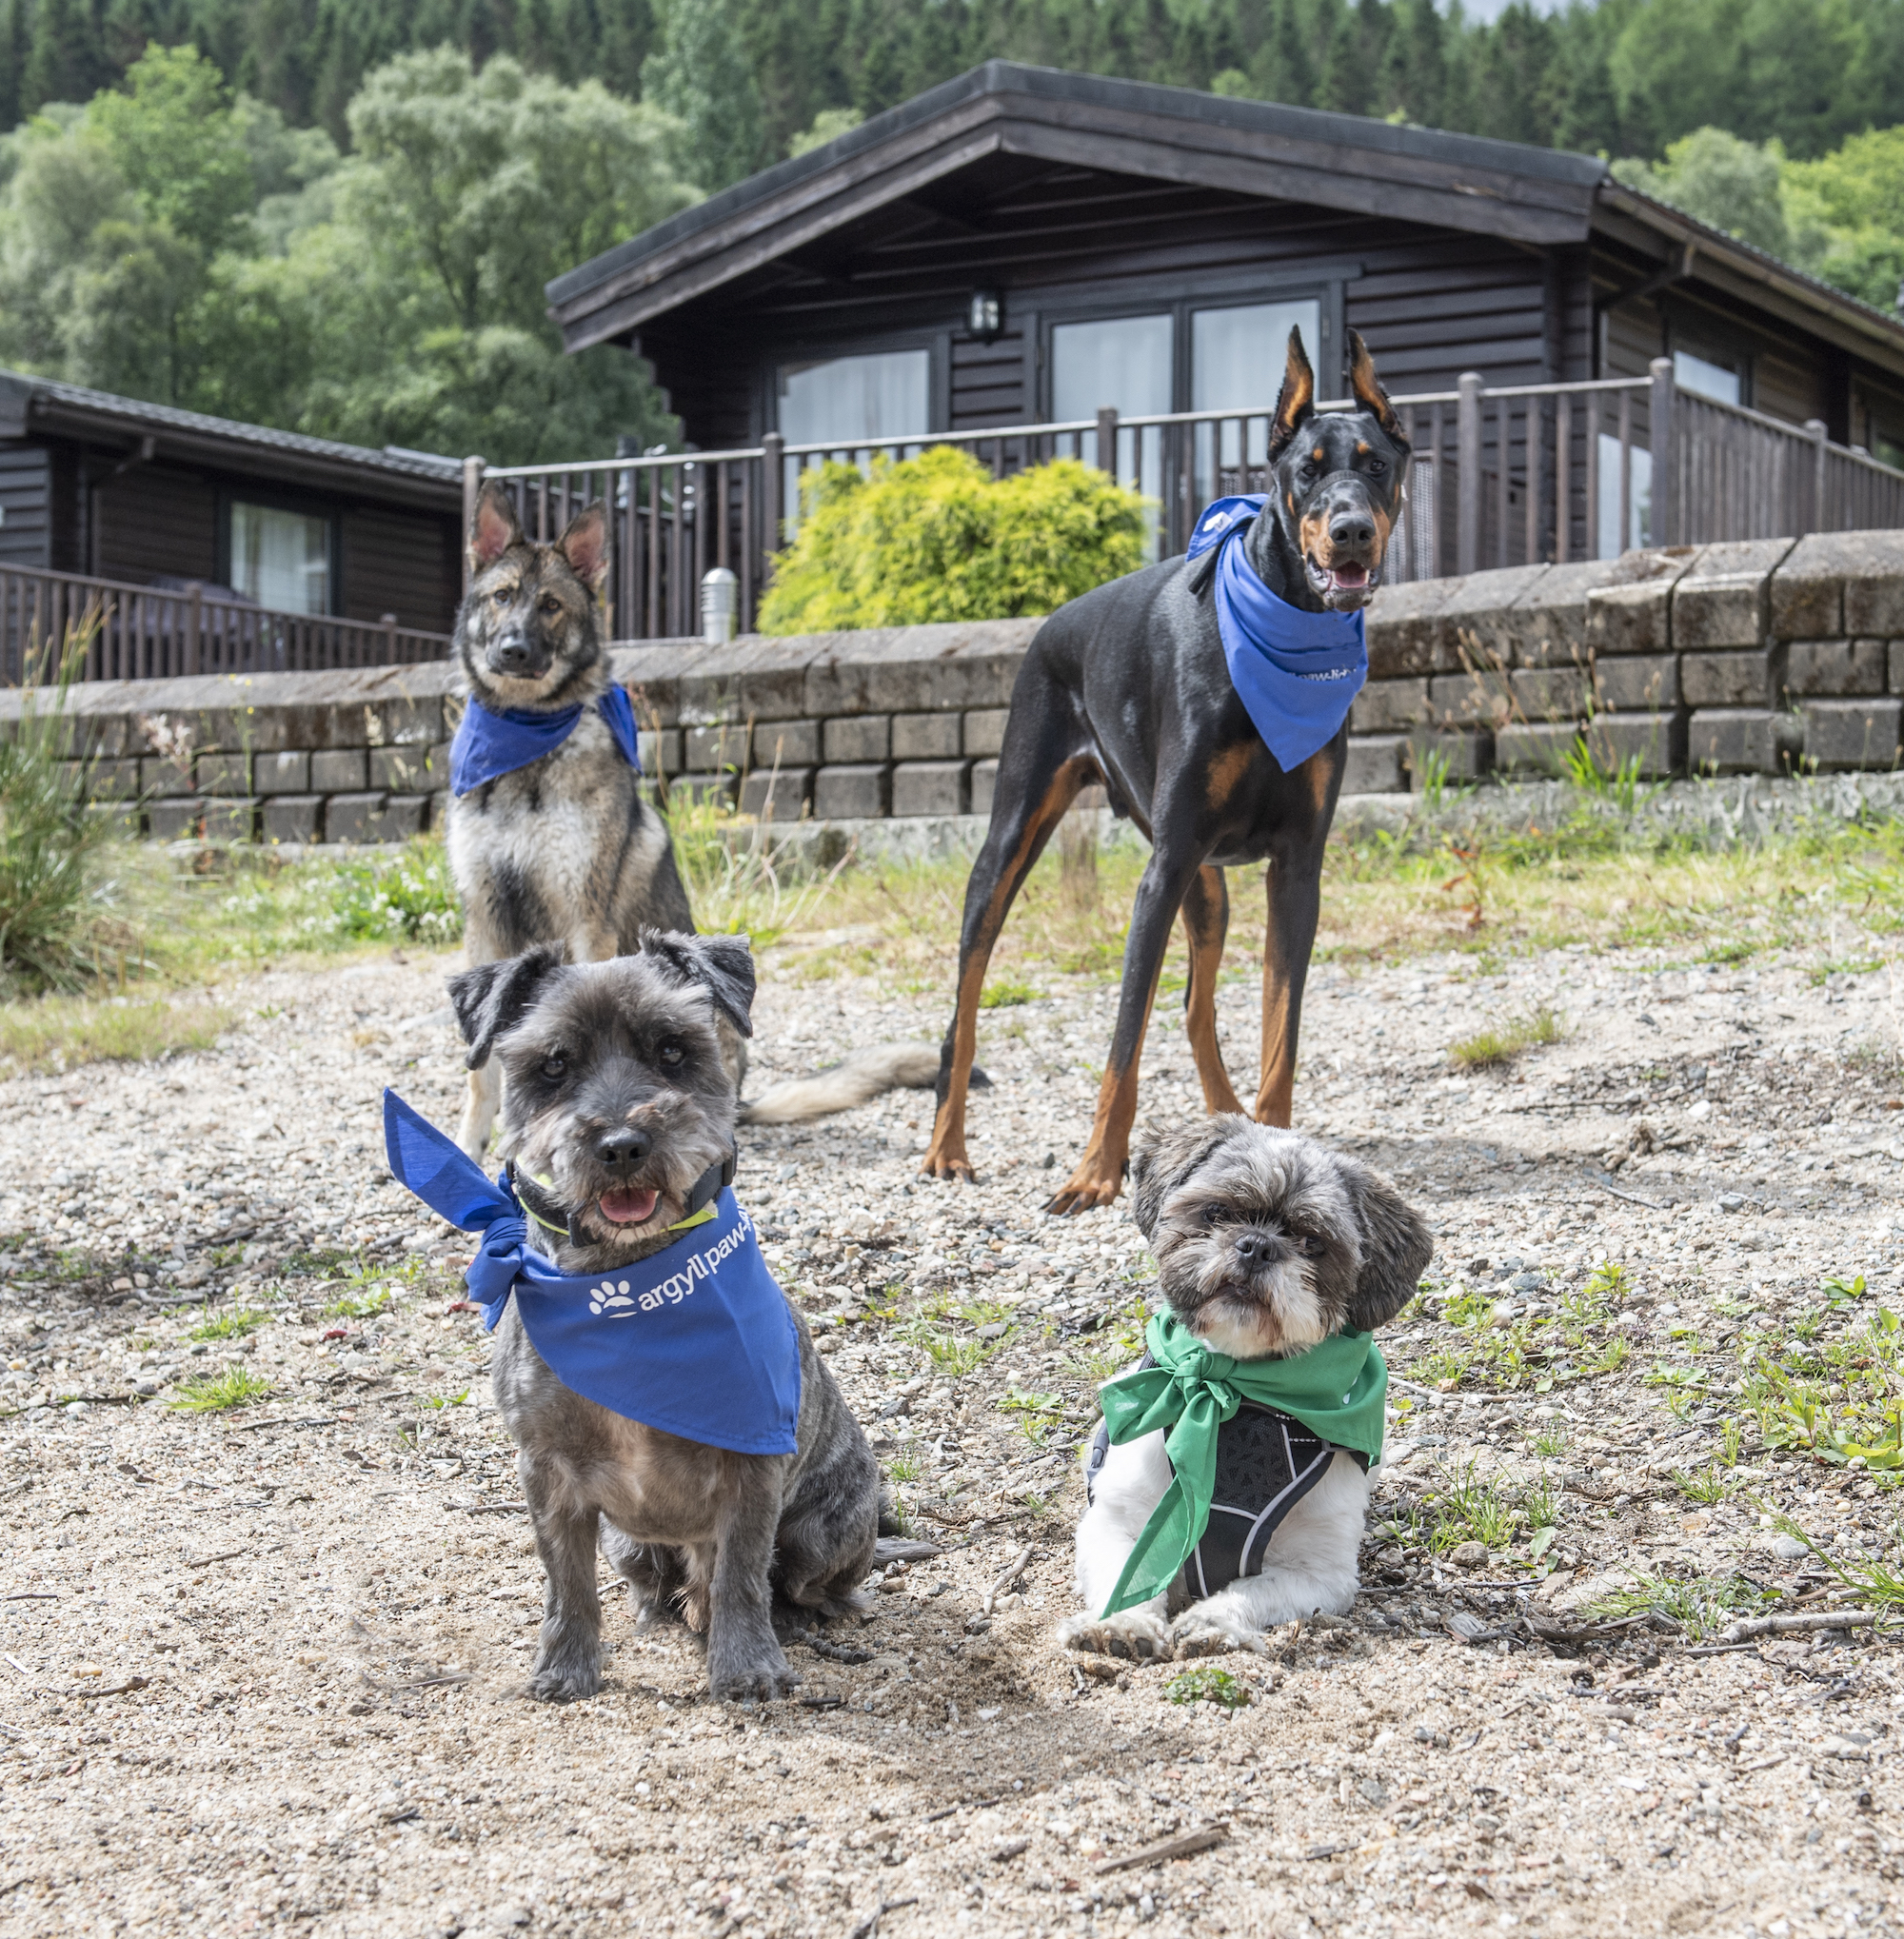 Scottish rescue dogs enjoy a summer holiday at private